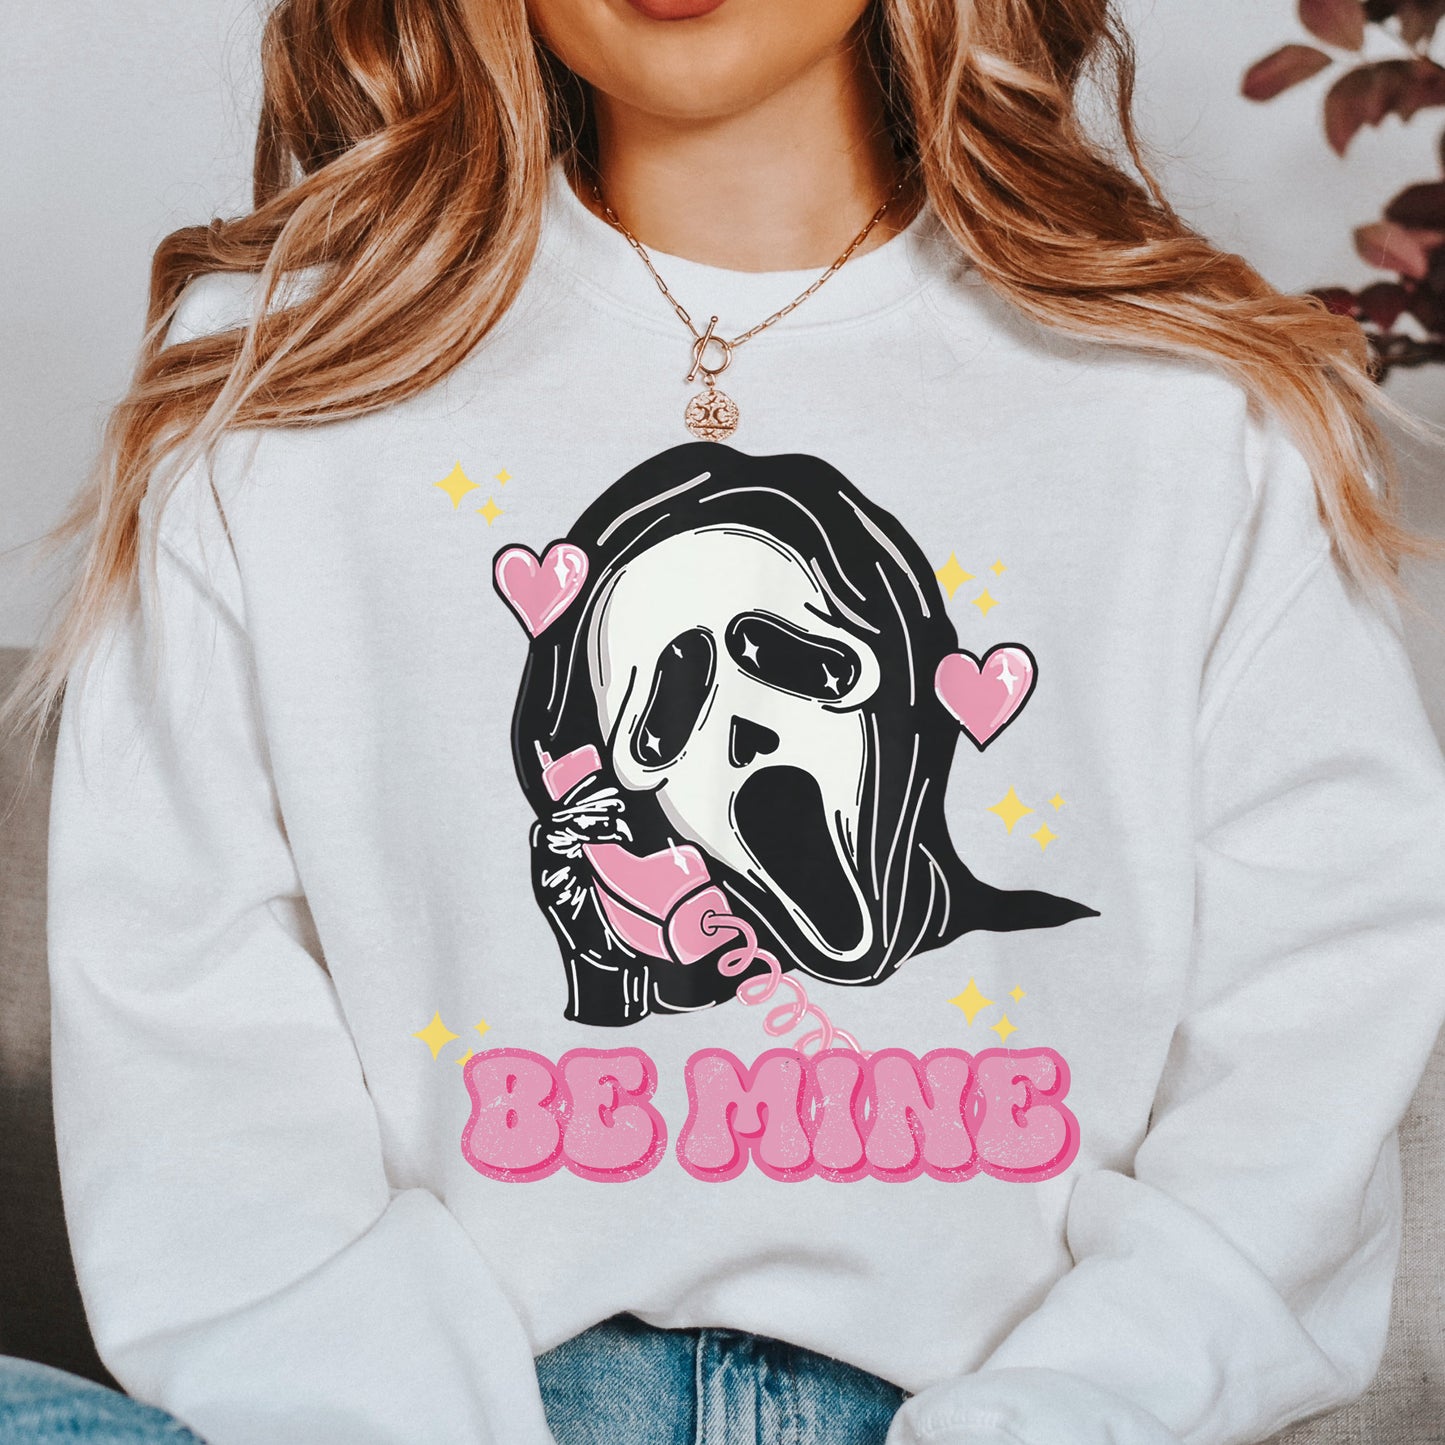 Scream Sweatshirt, No you hang up, Spooky Valentine's Day, Ghostface, Horror Hoodie, Valentine's Day gift, Be Mine